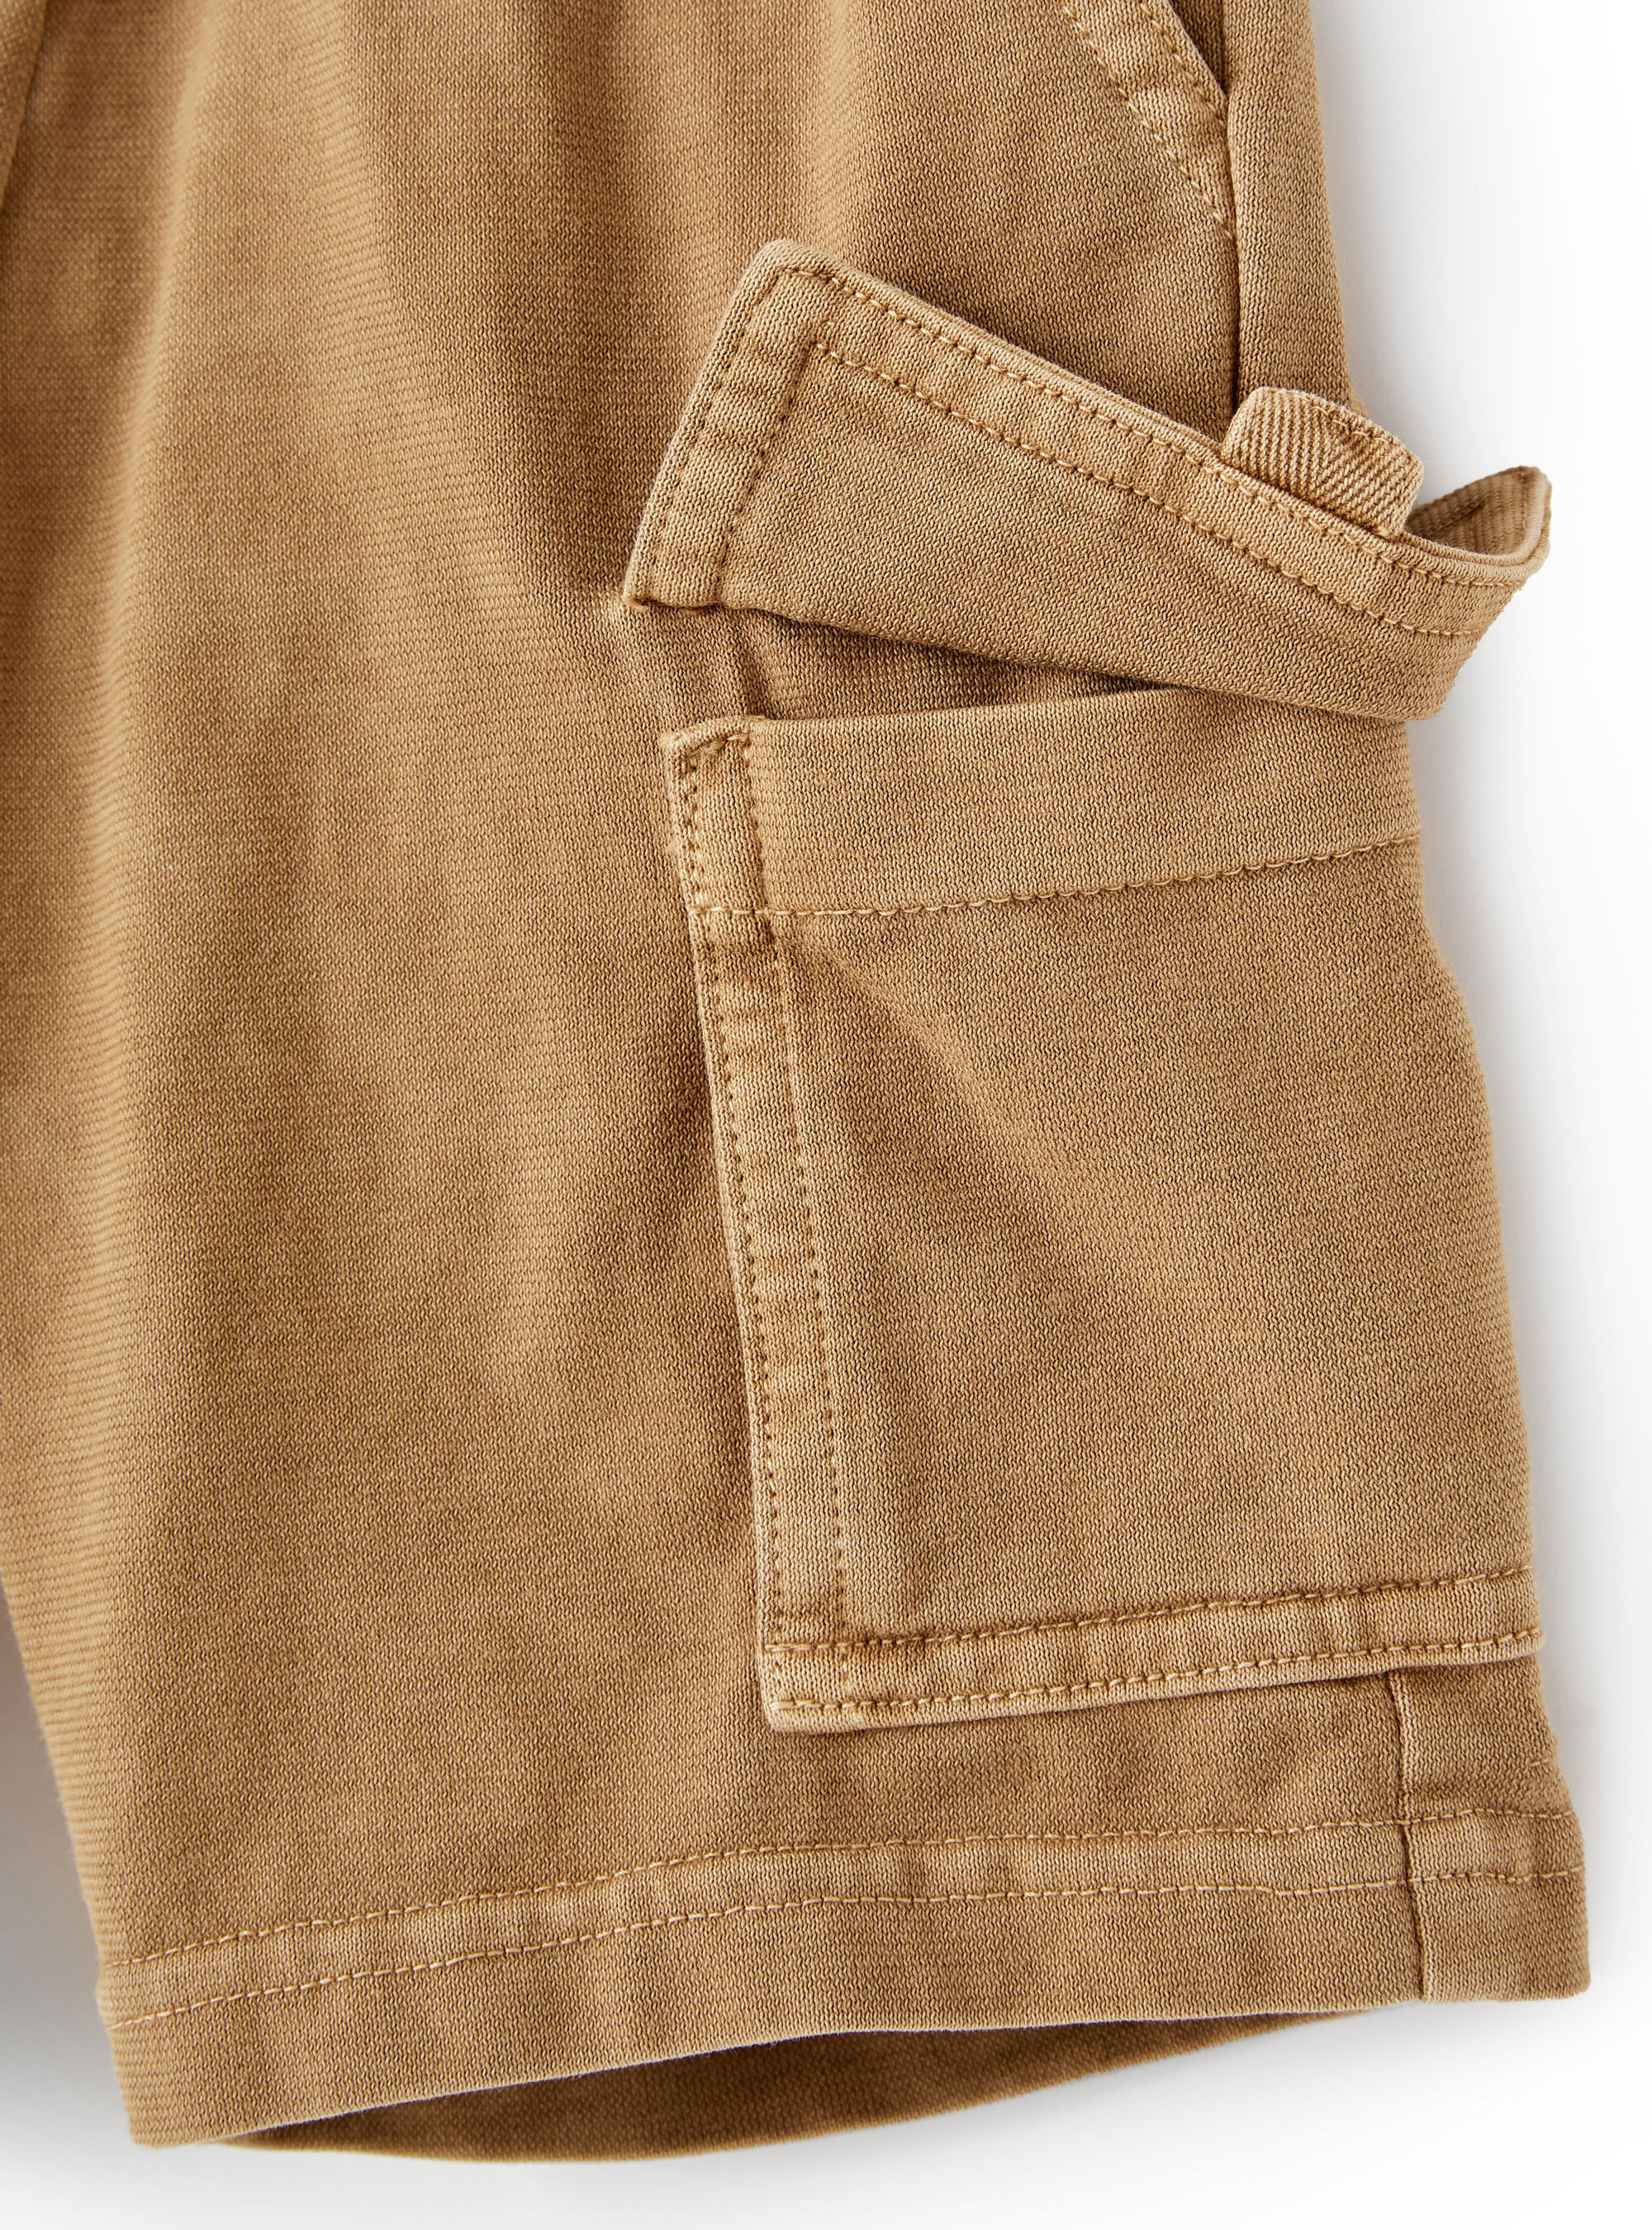 Jersey cargo shorts - Brown | Il Gufo